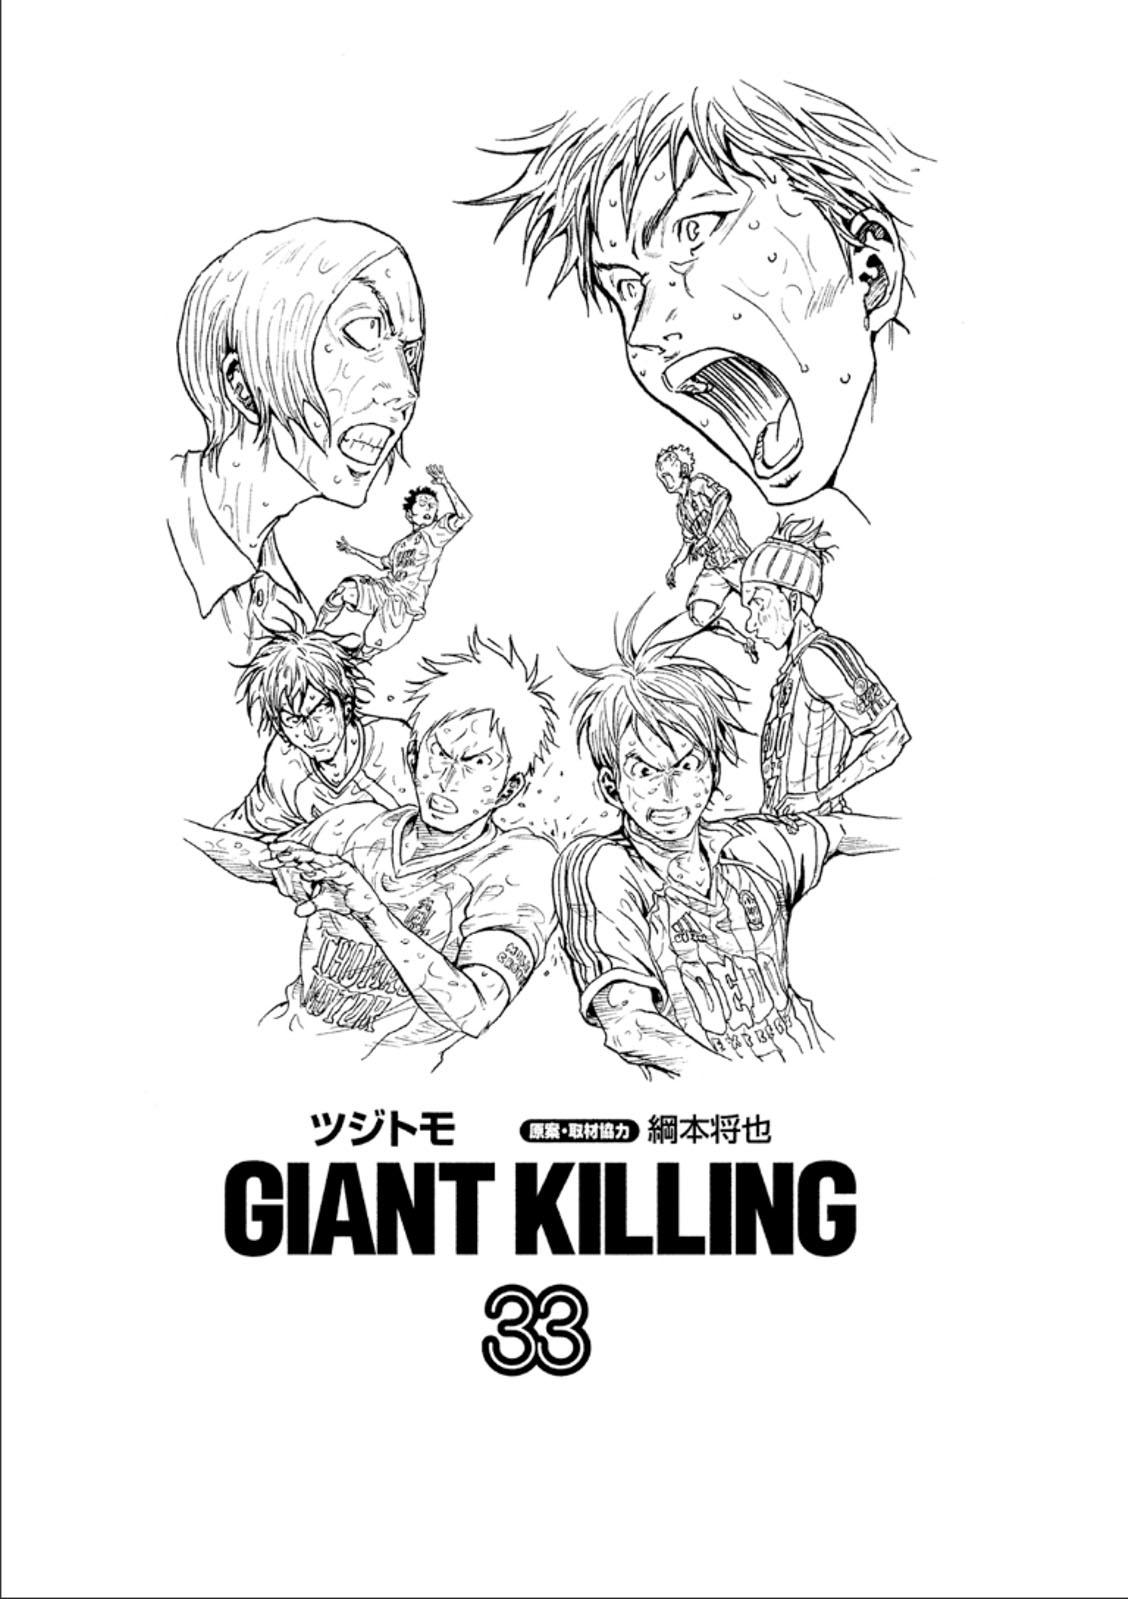 Giant killing capitulo 19, By Giant killing